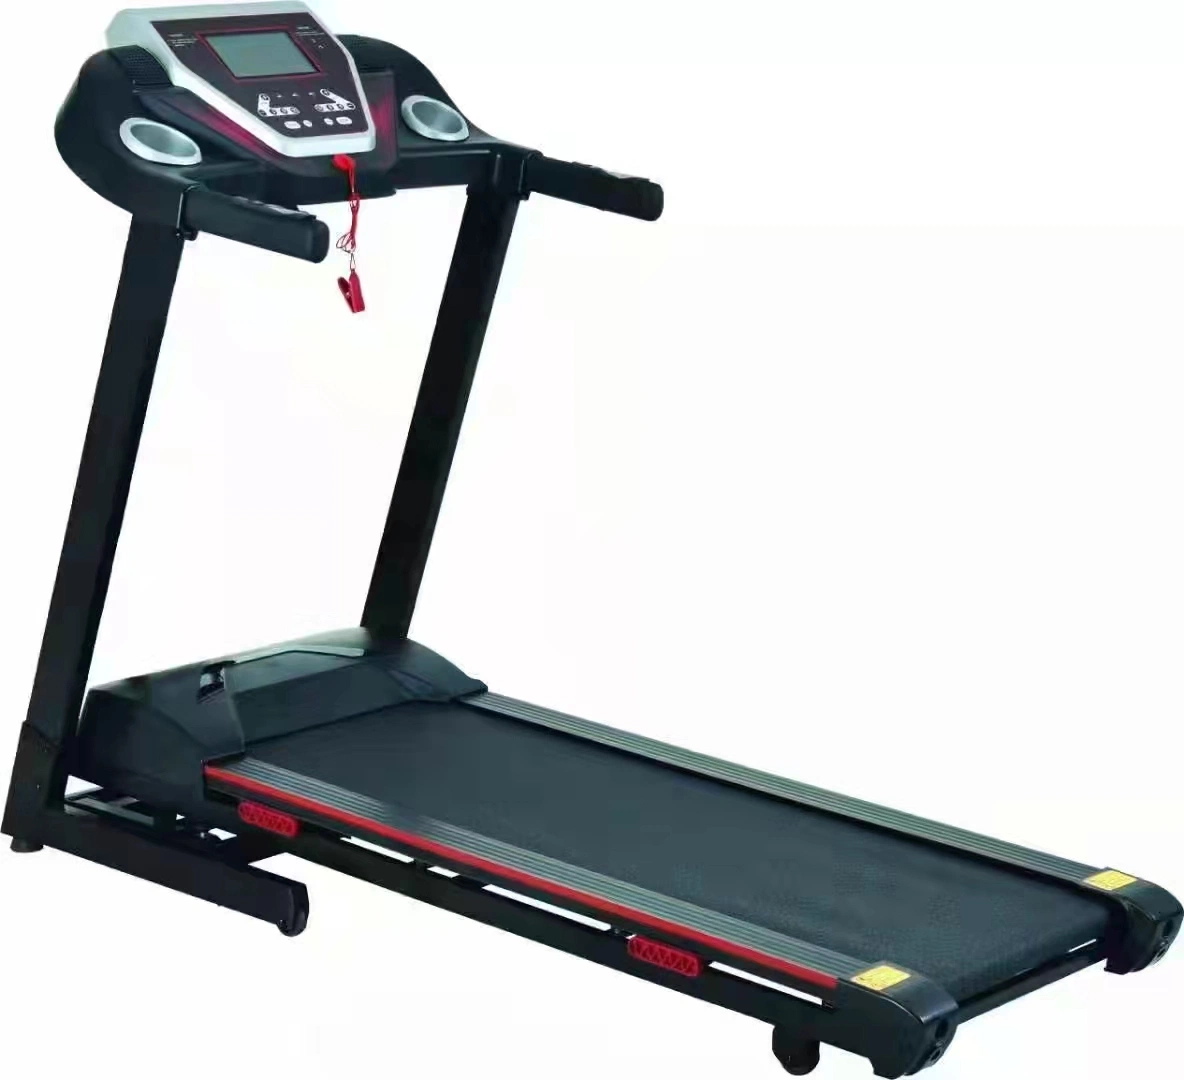 Commercial Gym Air Runner High Quality Electric Home Treadmill Running Machine Motorized Treadmill